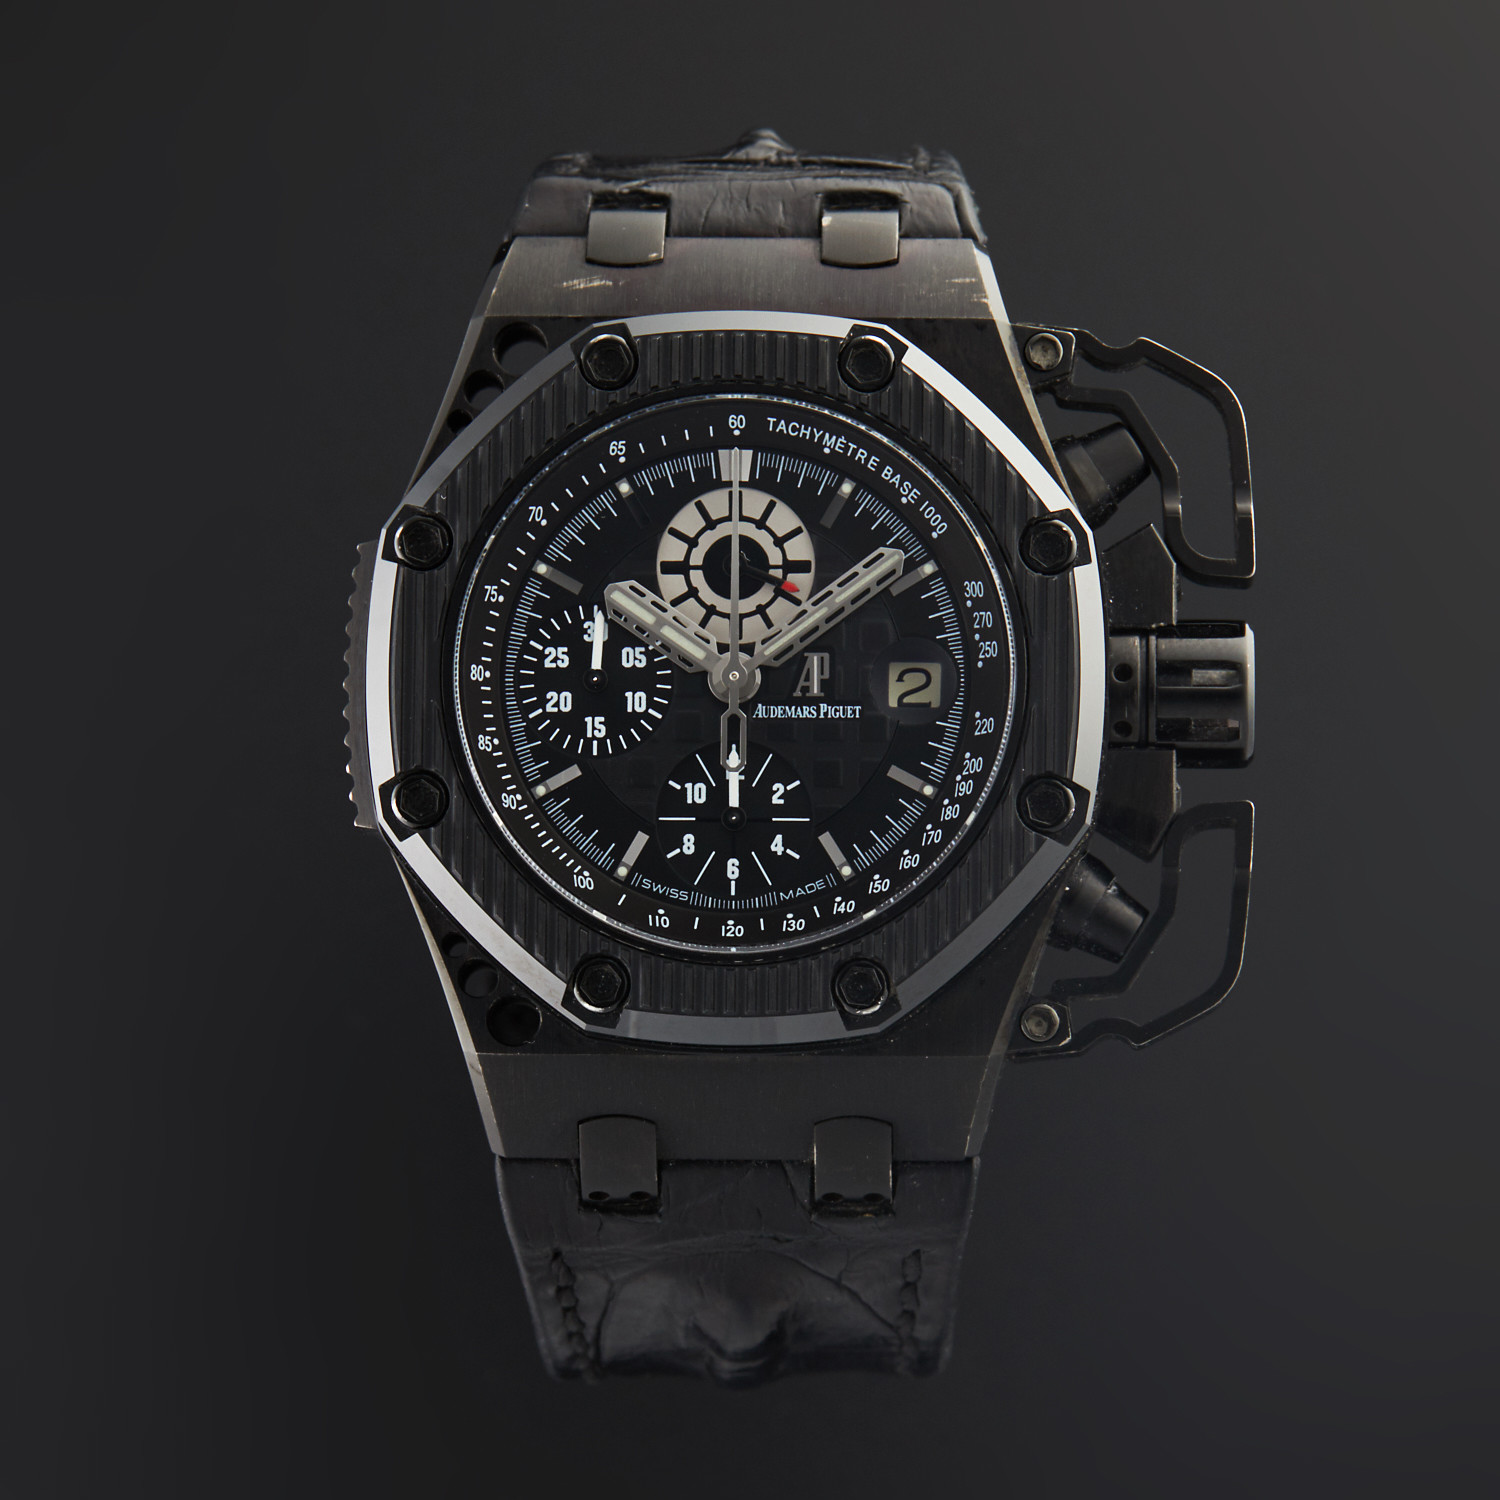 Audemars piguet royal oak offshore survivor 26165io oo a002ca 01 Audemars Piguet Royal Oak Offshore Survivor Chronograph Automatic 26165io Oo A002ca 01 Pre Owned Phenomenal Timepieces Touch Of Modern